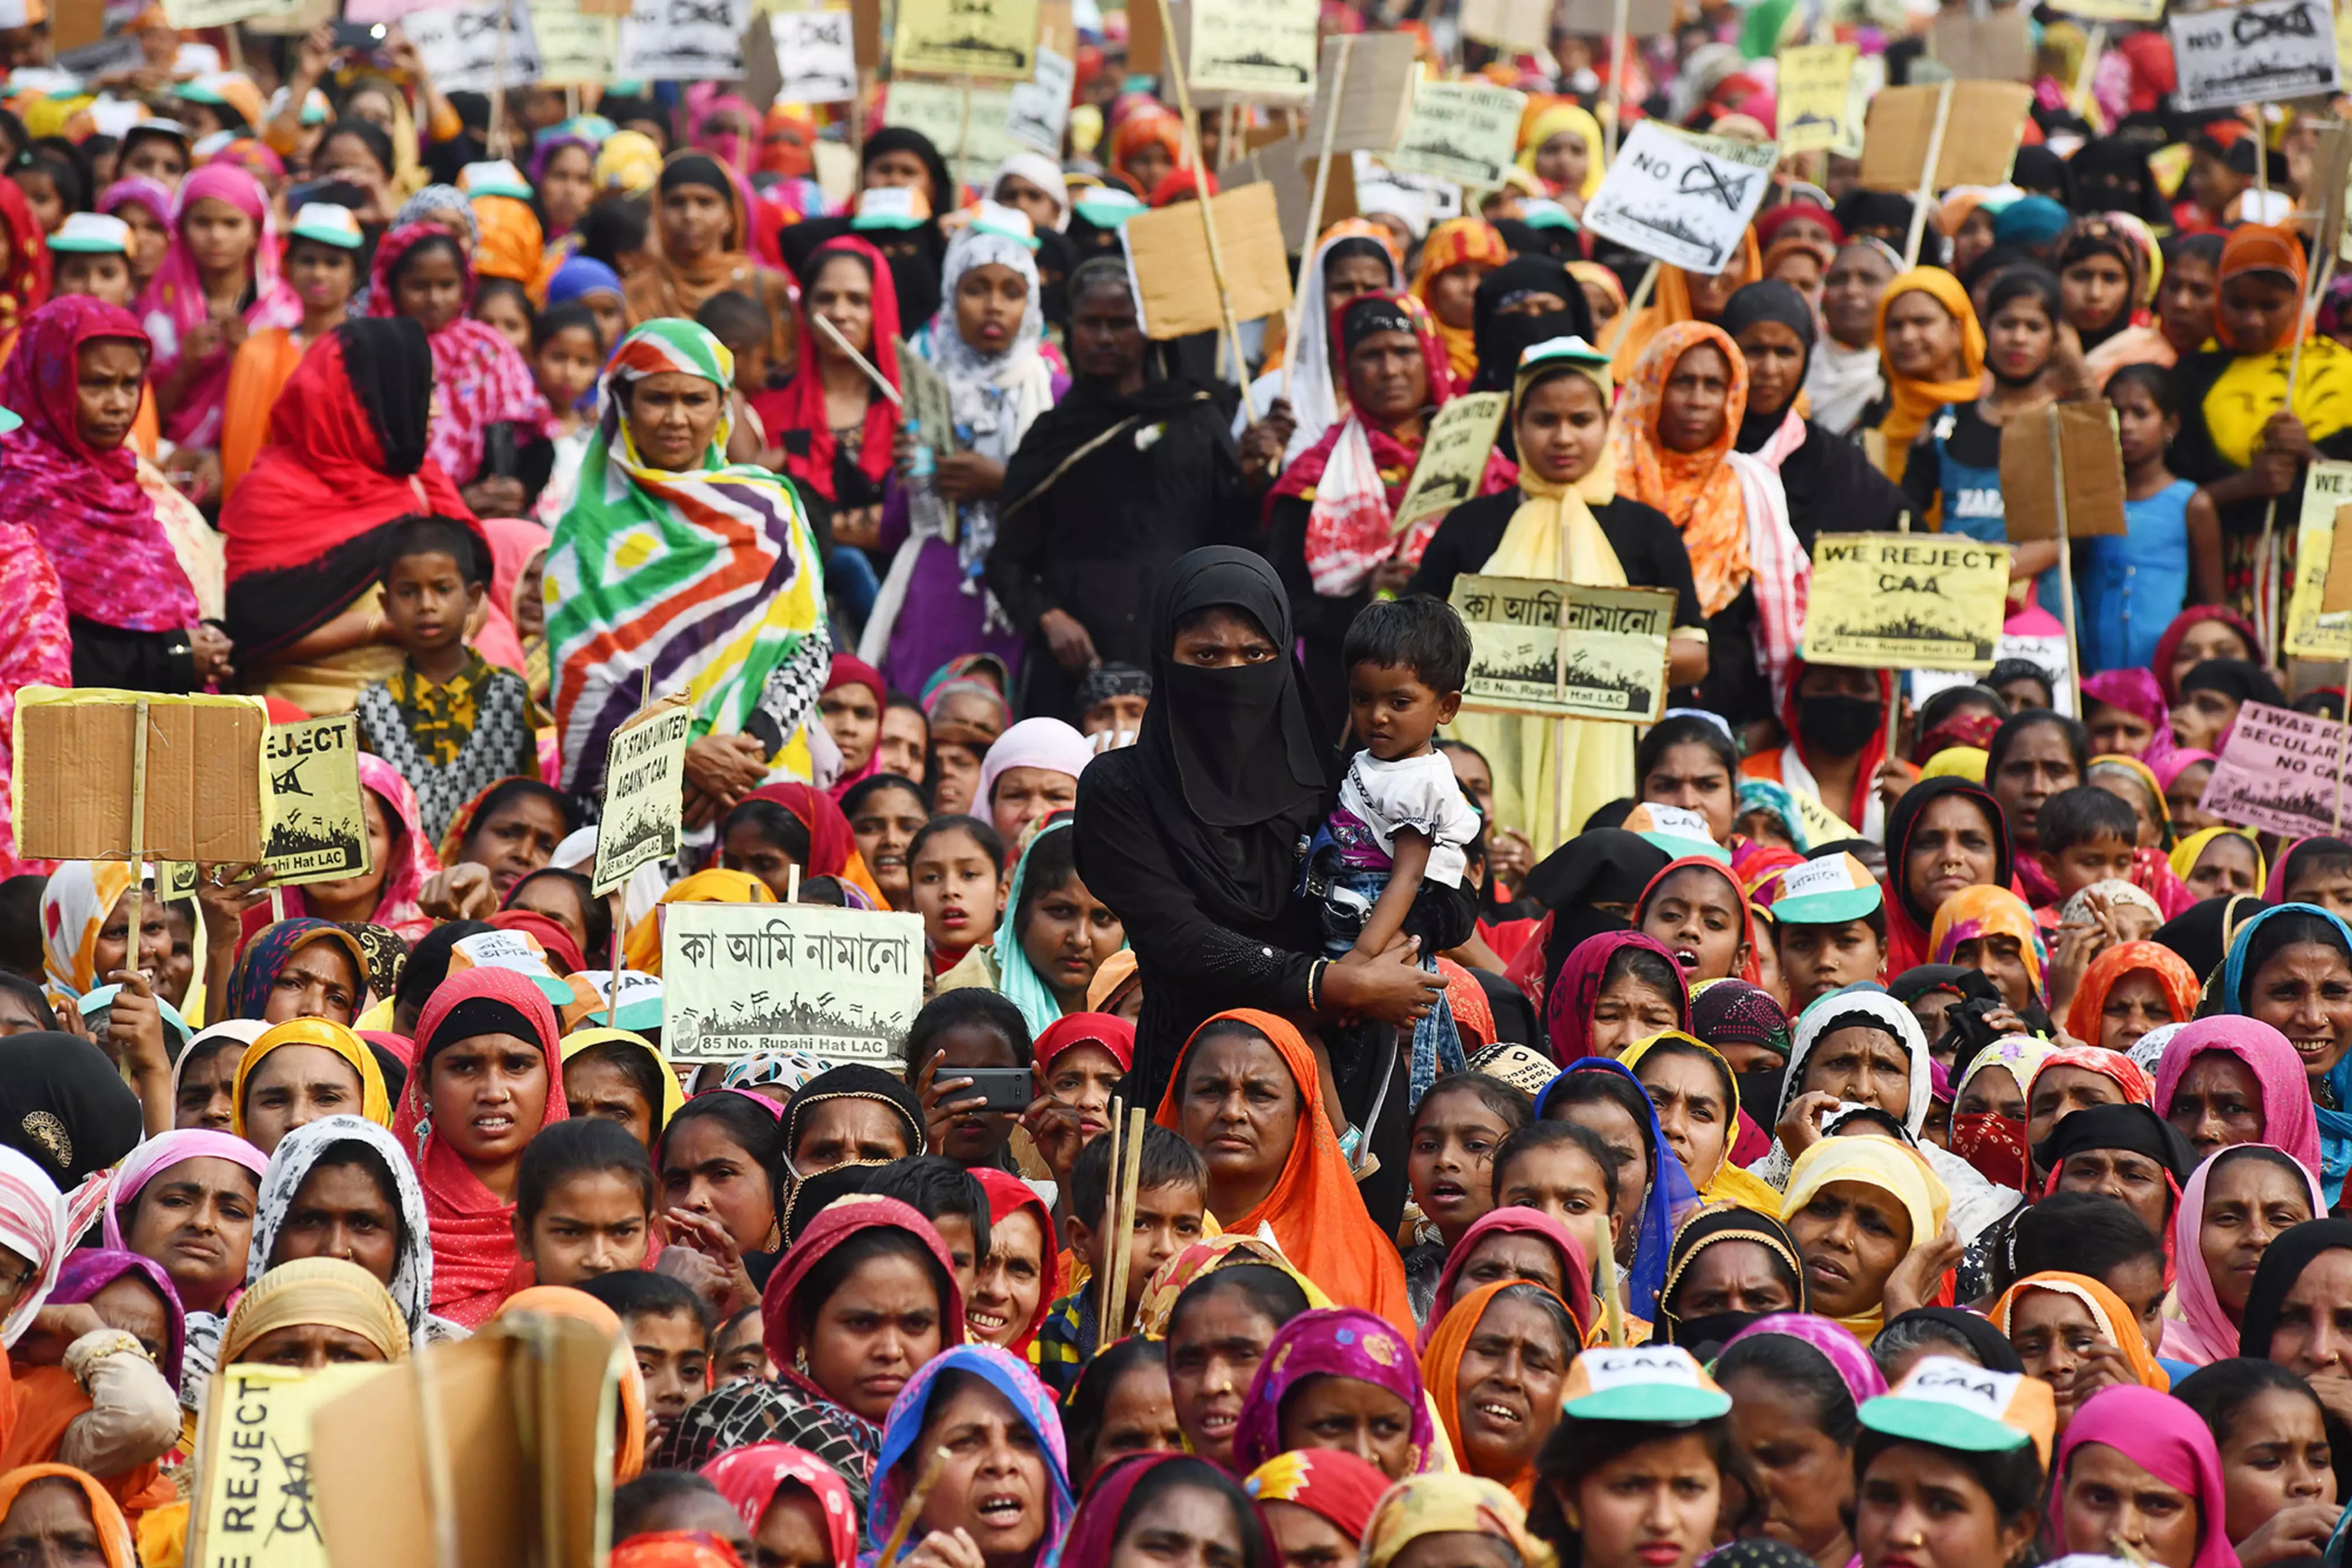 india's muslims: an increasingly marginalized population | council on foreign relations